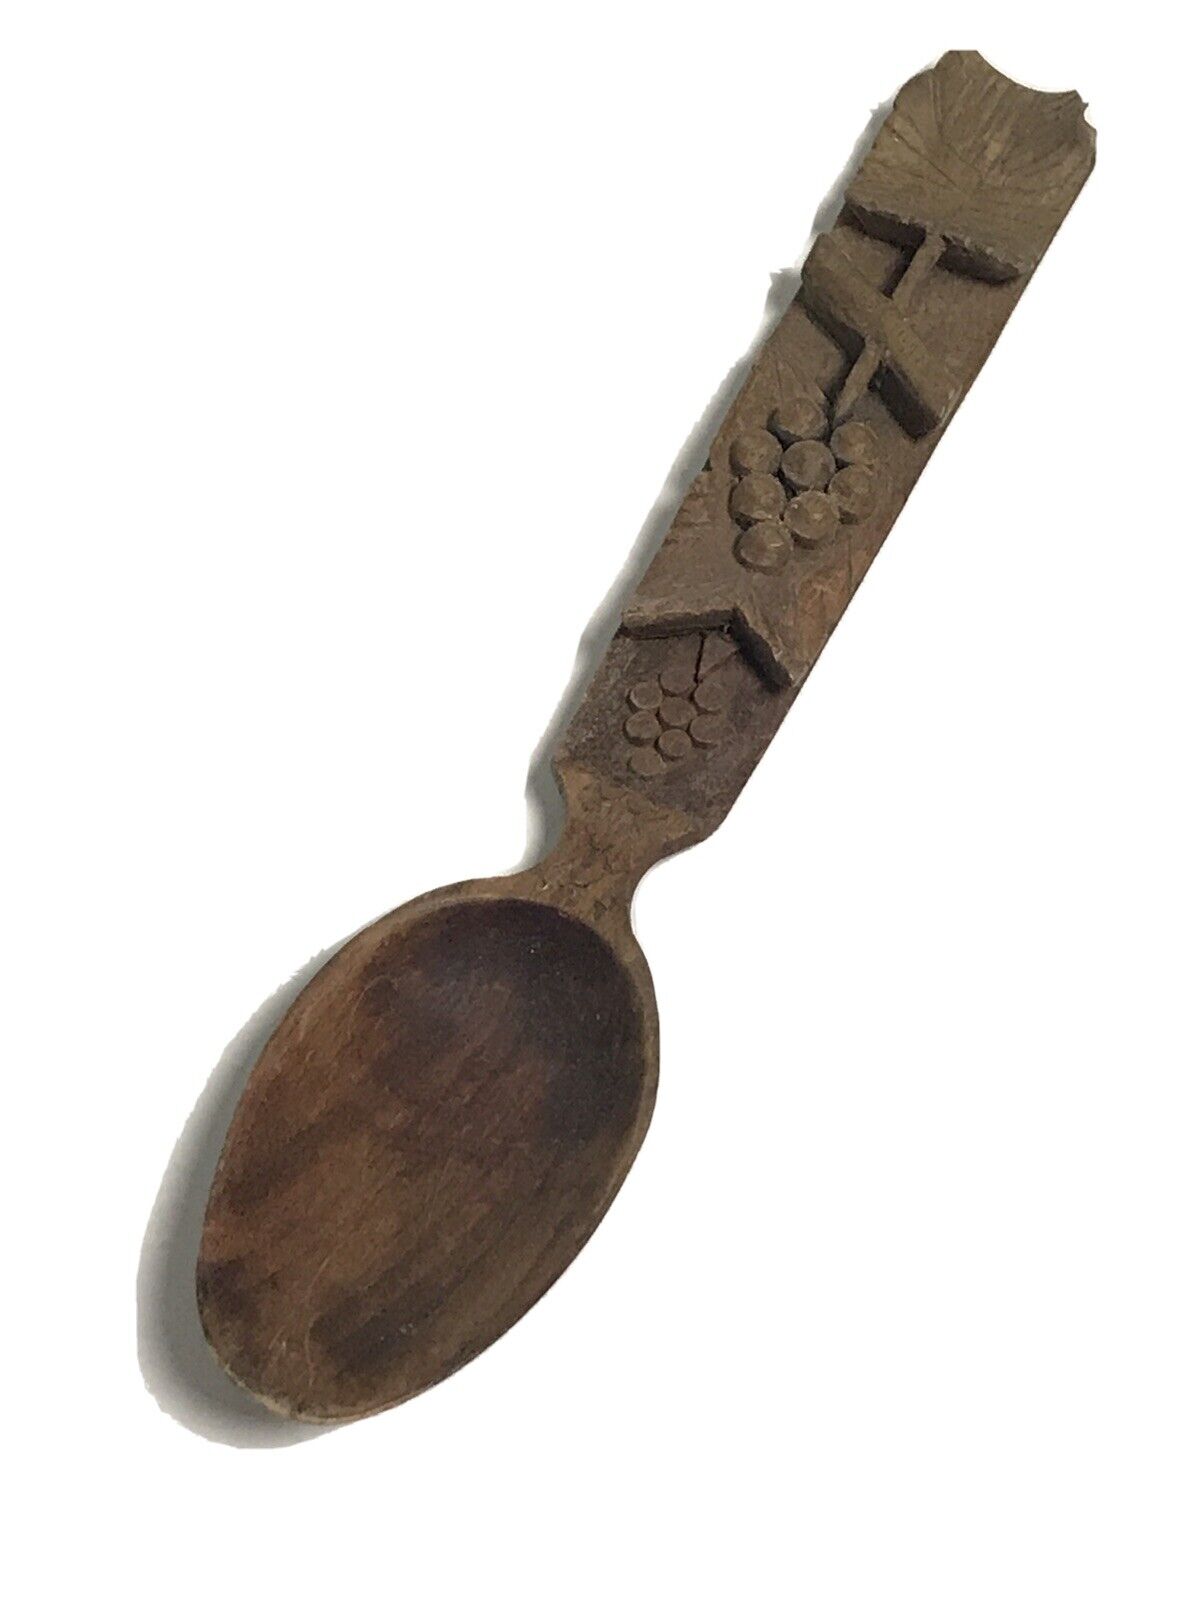 Handcarved wooden spoon grapes and leaves 9 3/4” Folk Art